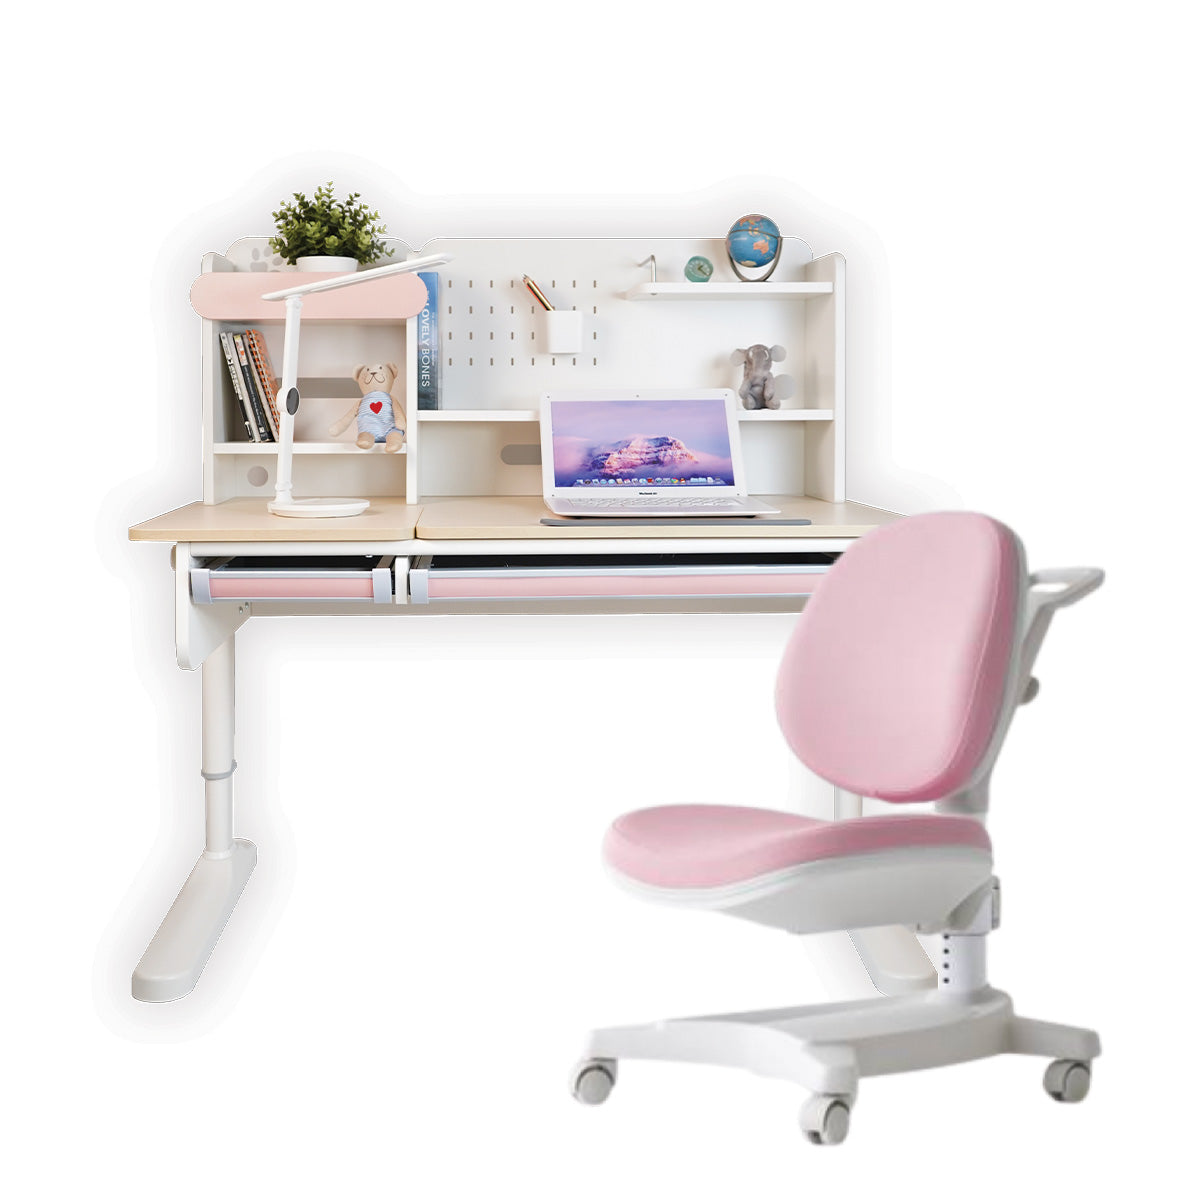 Impact Ergo-Growing Study Desk And Chair Set 1200mm x 650mm, IM-G1200A (Ready Stocks)